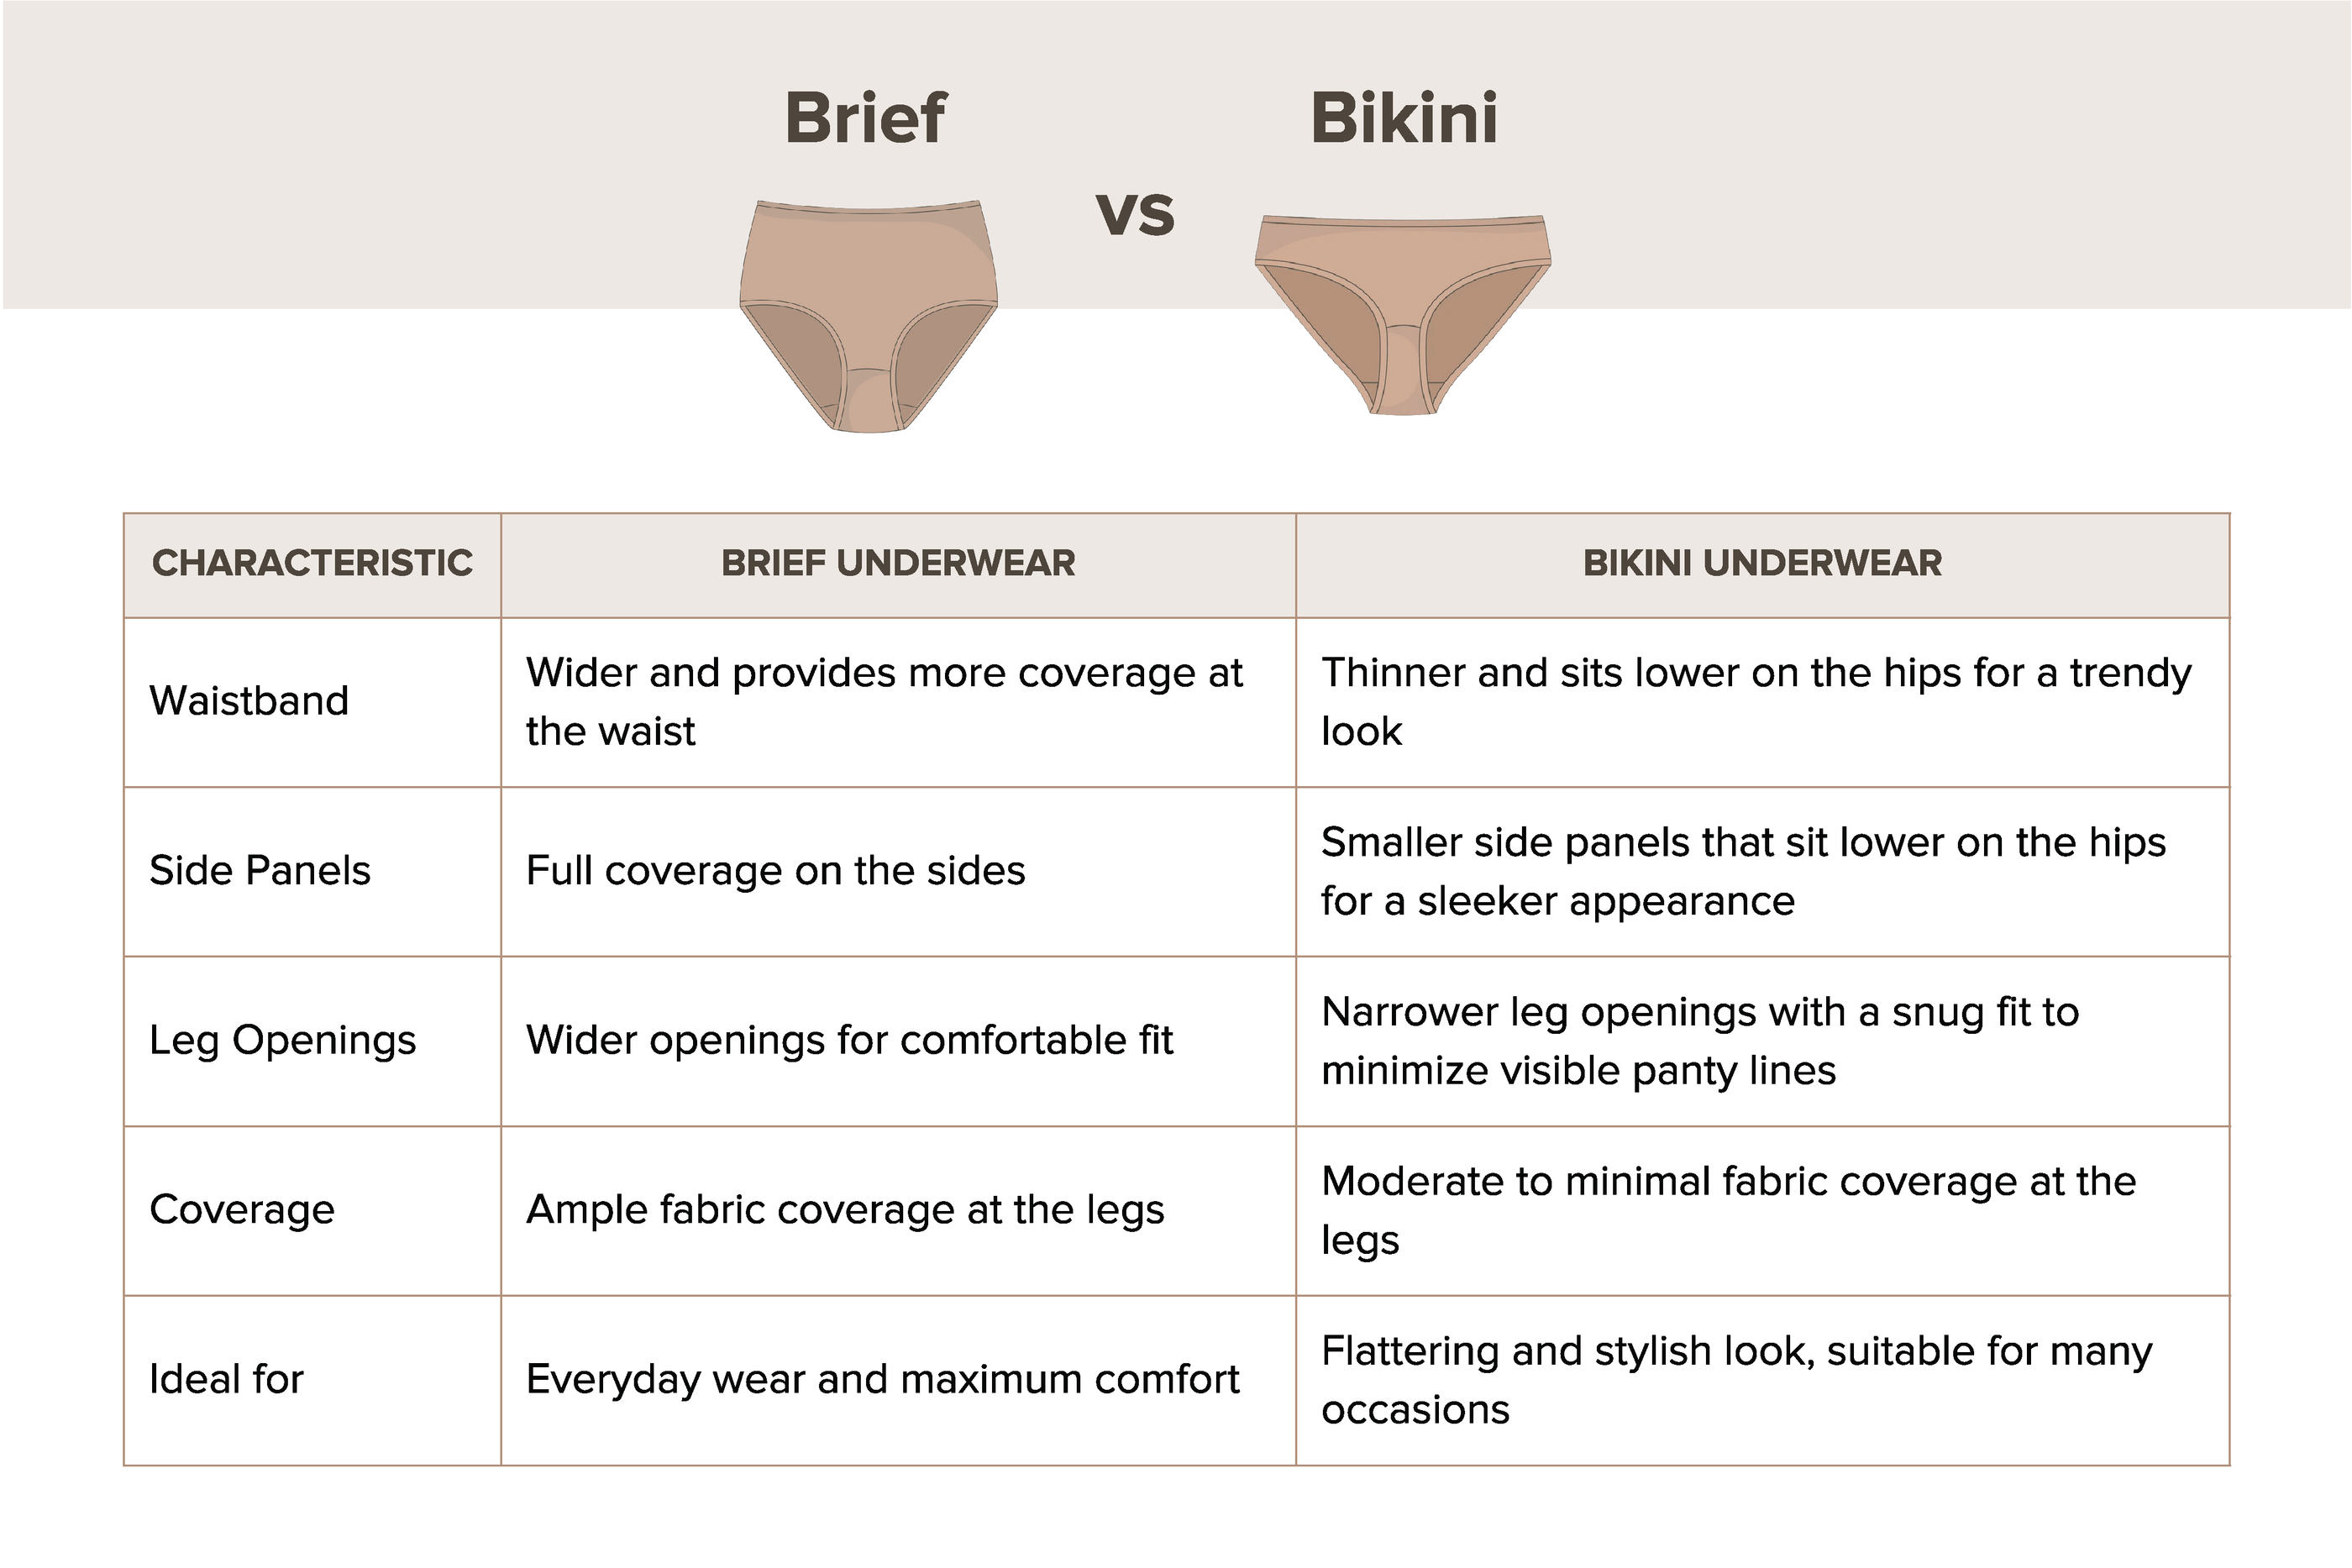 Are people/women able to tell the difference between brief lines